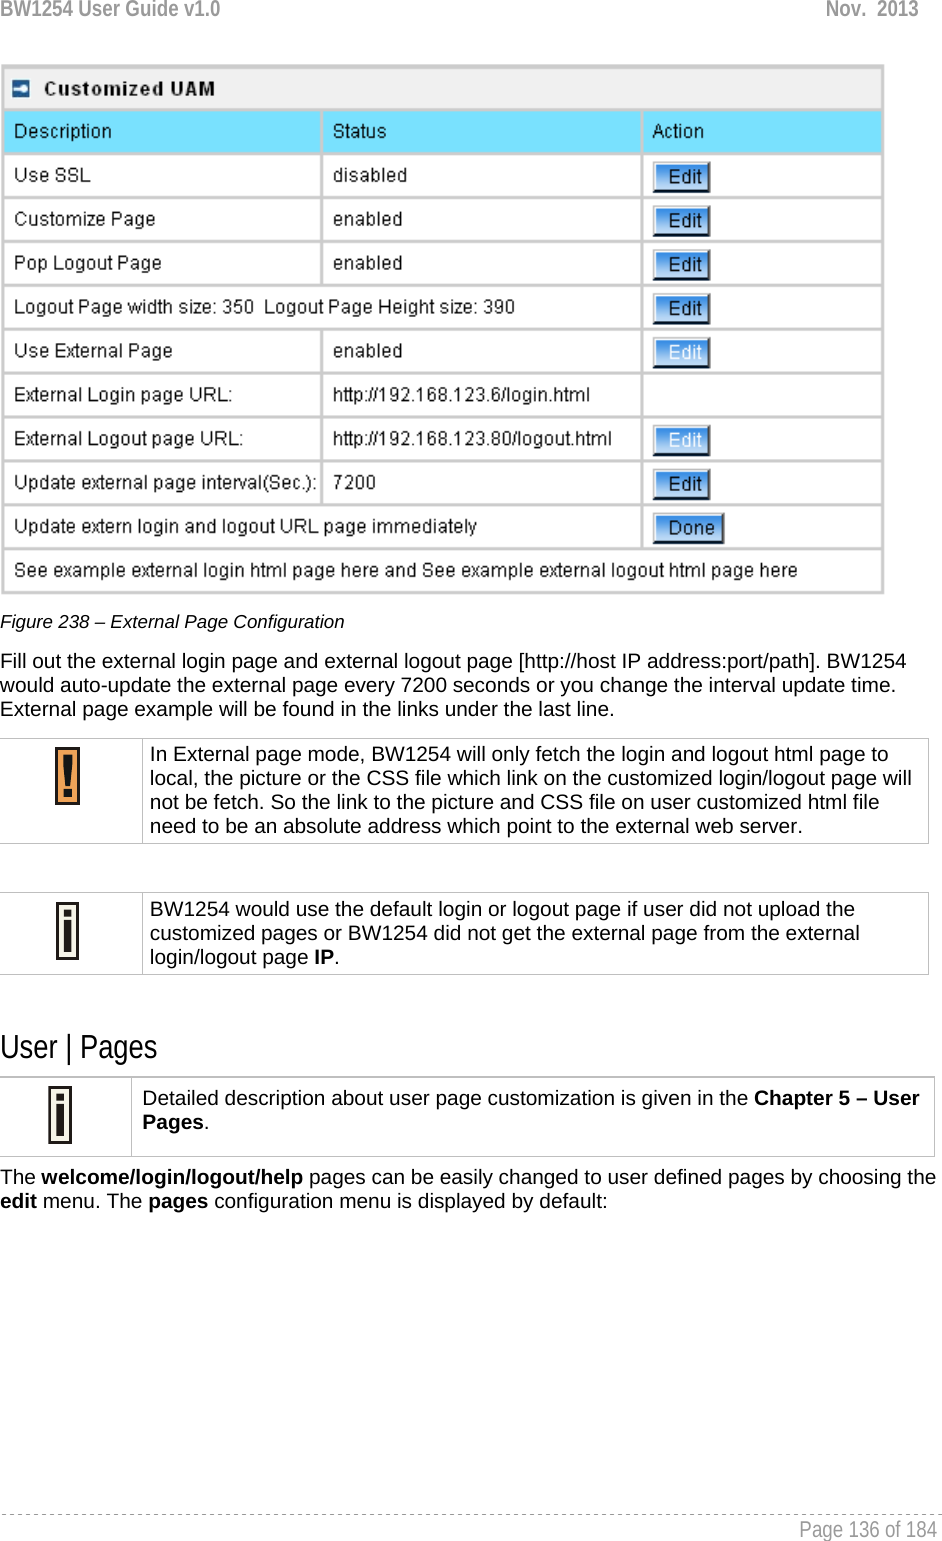 BW1254 User Guide v1.0  Nov.  2013     Page 136 of 184    Figure 238 – External Page Configuration Fill out the external login page and external logout page [http://host IP address:port/path]. BW1254 would auto-update the external page every 7200 seconds or you change the interval update time. External page example will be found in the links under the last line.   User | Pages  Detailed description about user page customization is given in the Chapter 5 – User Pages. The welcome/login/logout/help pages can be easily changed to user defined pages by choosing the edit menu. The pages configuration menu is displayed by default:  In External page mode, BW1254 will only fetch the login and logout html page to local, the picture or the CSS file which link on the customized login/logout page will not be fetch. So the link to the picture and CSS file on user customized html file need to be an absolute address which point to the external web server.  BW1254 would use the default login or logout page if user did not upload the customized pages or BW1254 did not get the external page from the external login/logout page IP. 